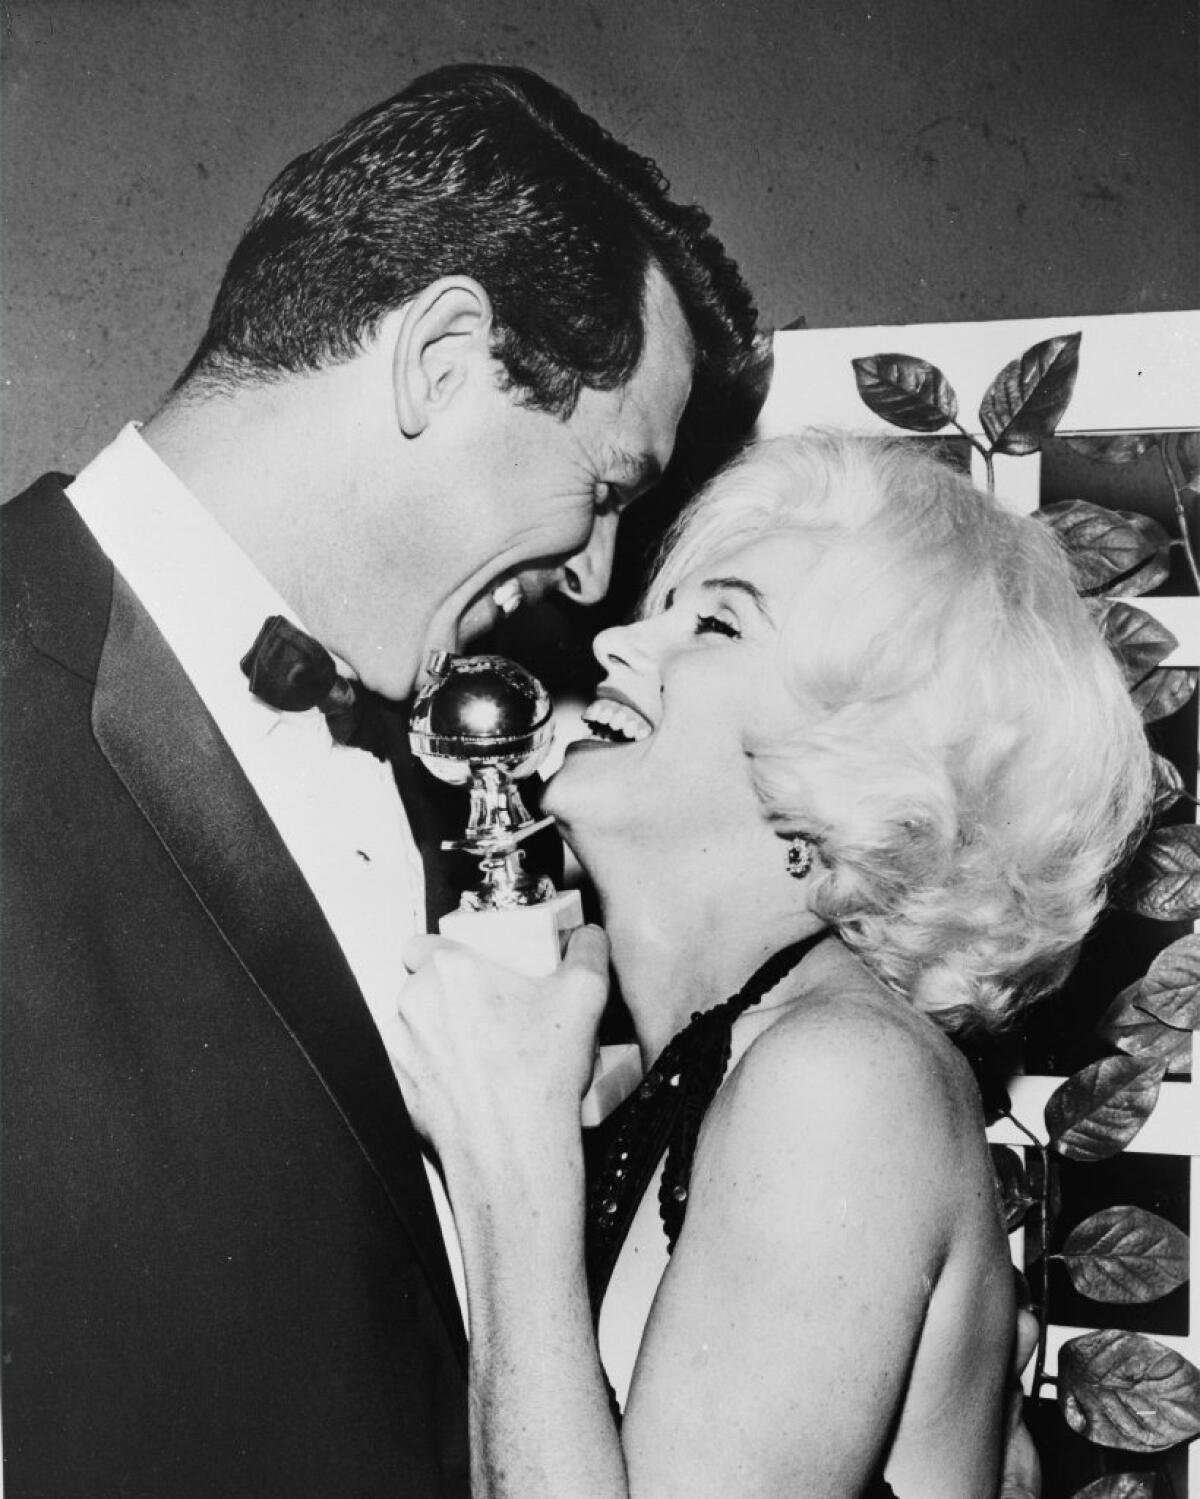 Marilyn Monroe receives her Golden Globe award from Rock Hudson at the Beverly Hilton in 1962.